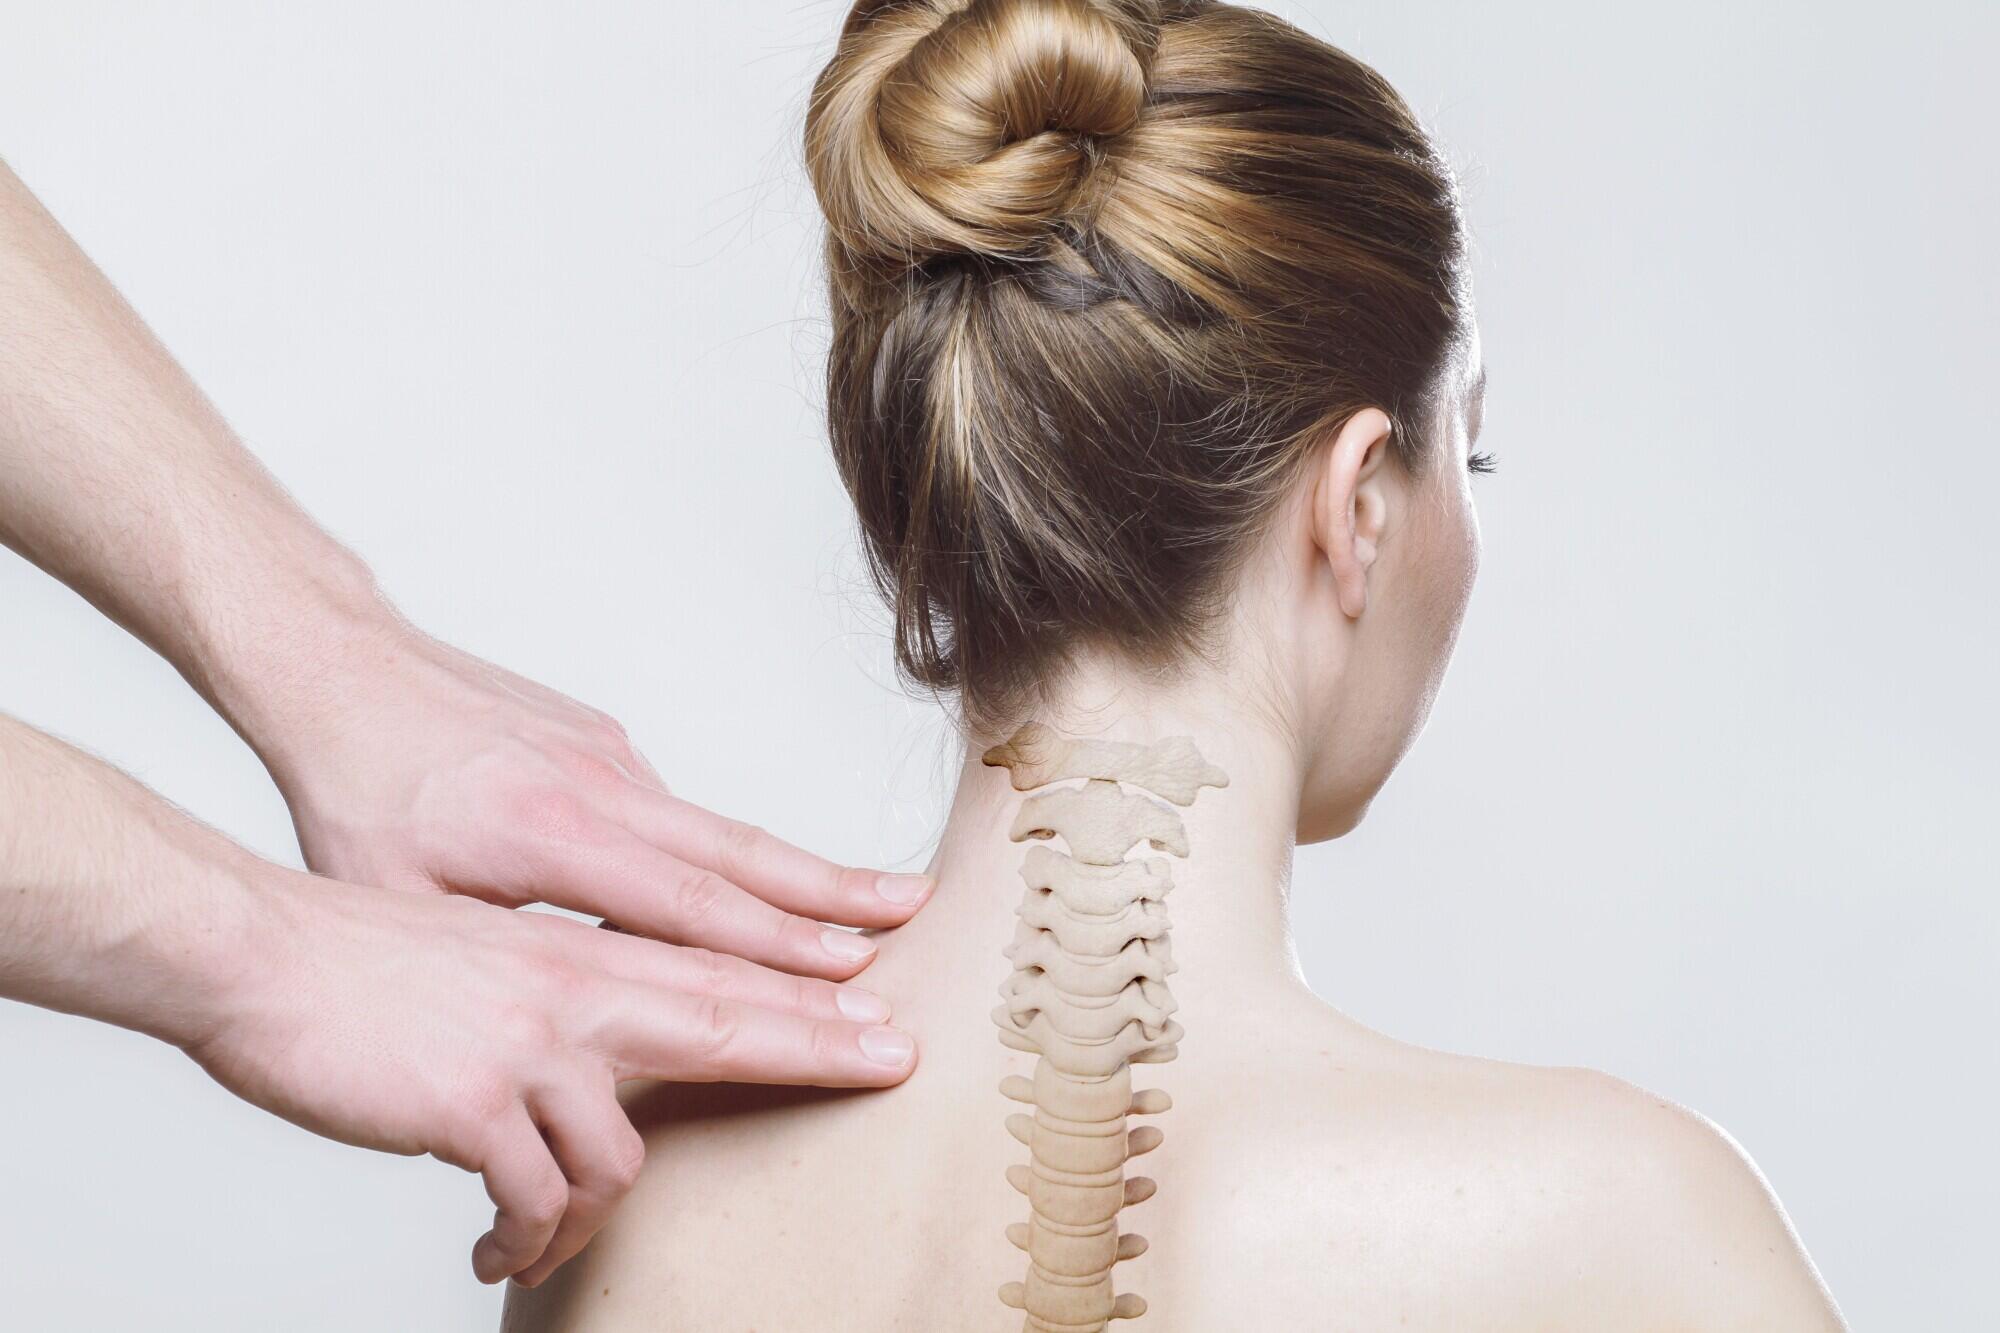 Decoding Cervical Facet Pain: Therapeutic Injections for Diagnostic Precision